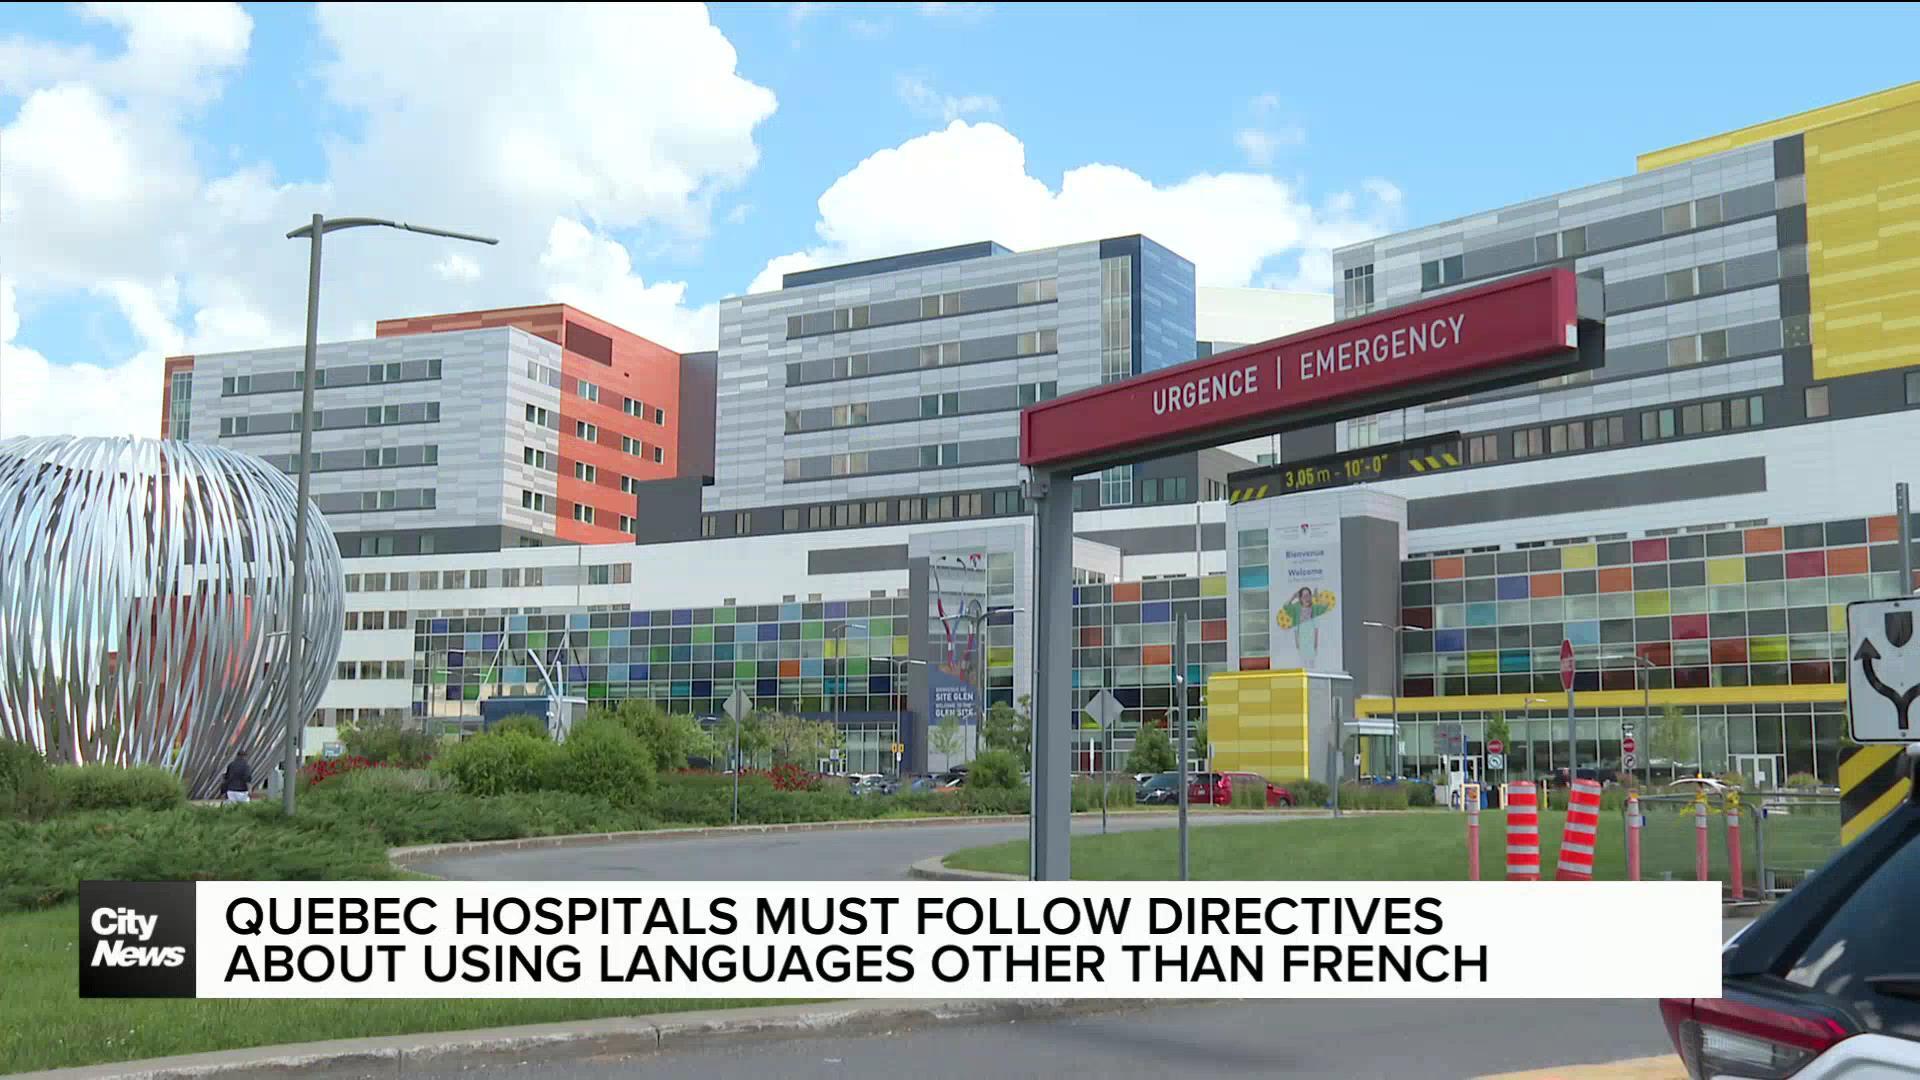 Quebec hospitals must now follow new language directives